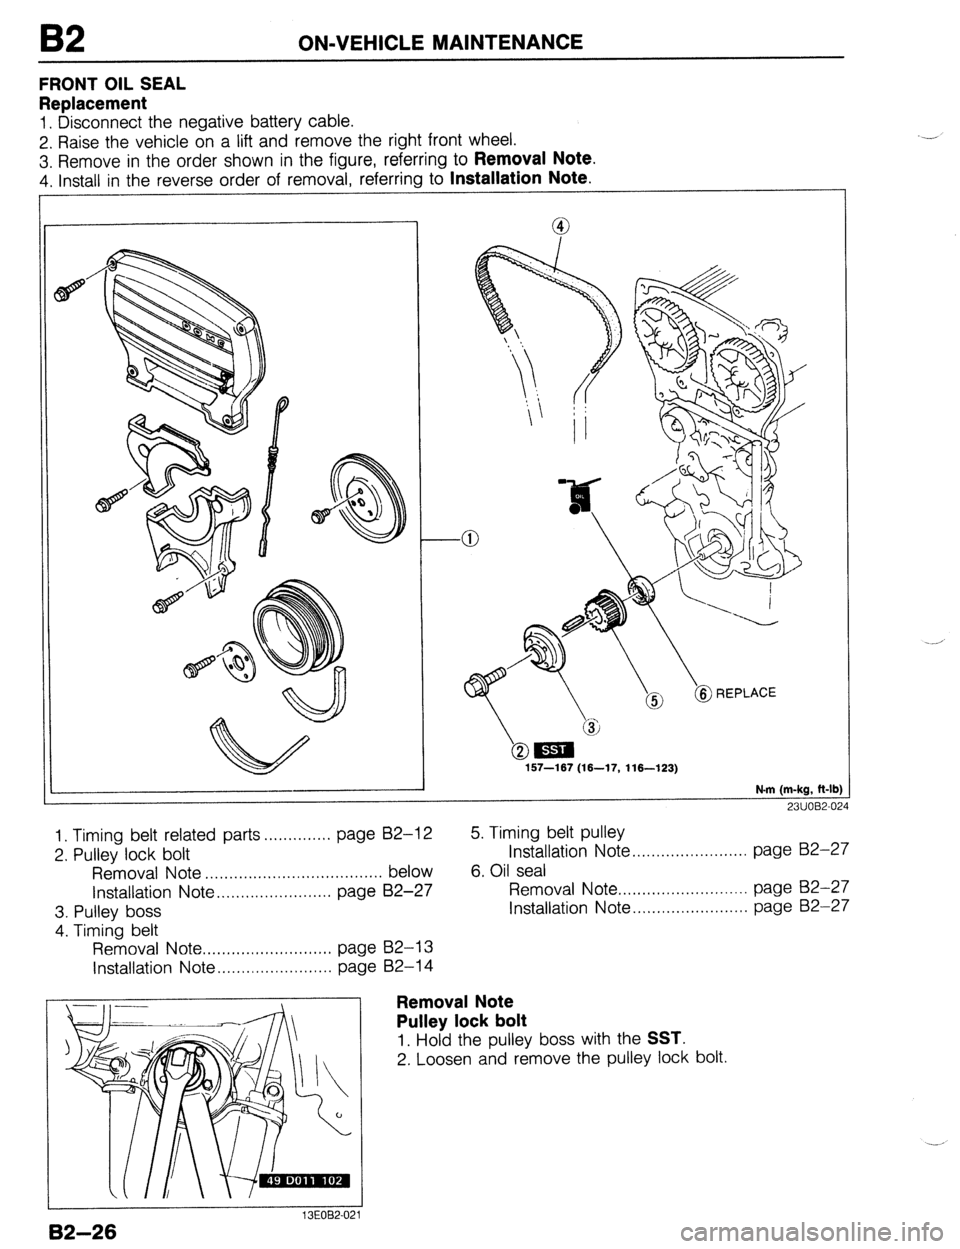 MAZDA 323 1989  Factory Repair Manual B2 ON-VEHICLE MAINTENANCE 
FRONT OIL SEAL 
Replacement 
1. Disconnect the negative battery cable. 
2. Raise the vehicle on a lift and remove the right front wheel. 
3. Remove in the order shown in the